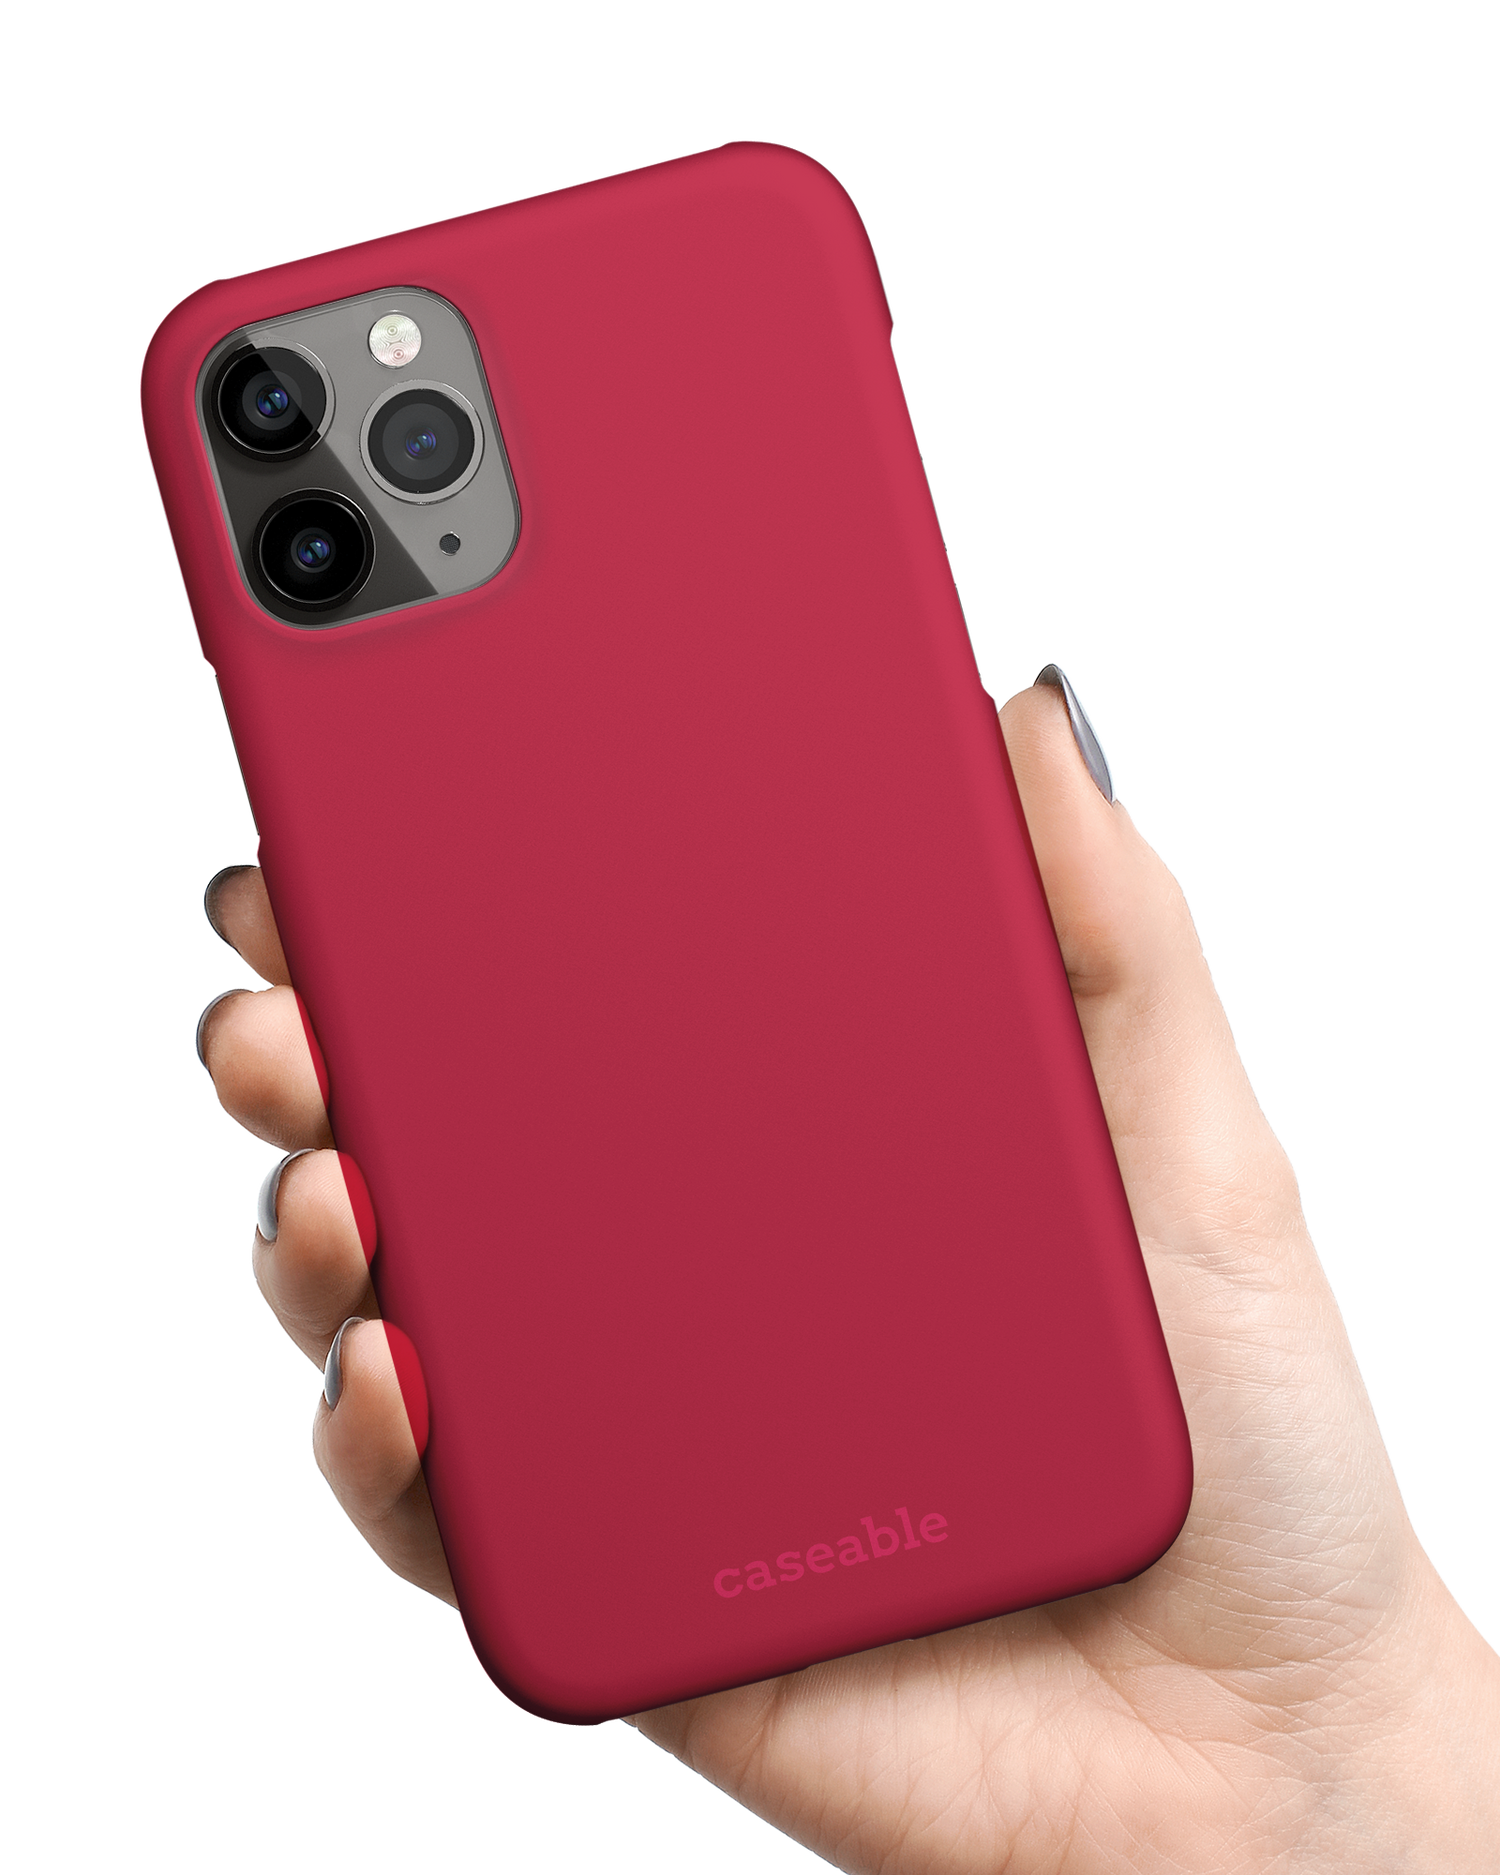 RED Hard Shell Phone Case Apple iPhone 11 Pro Max held in hand